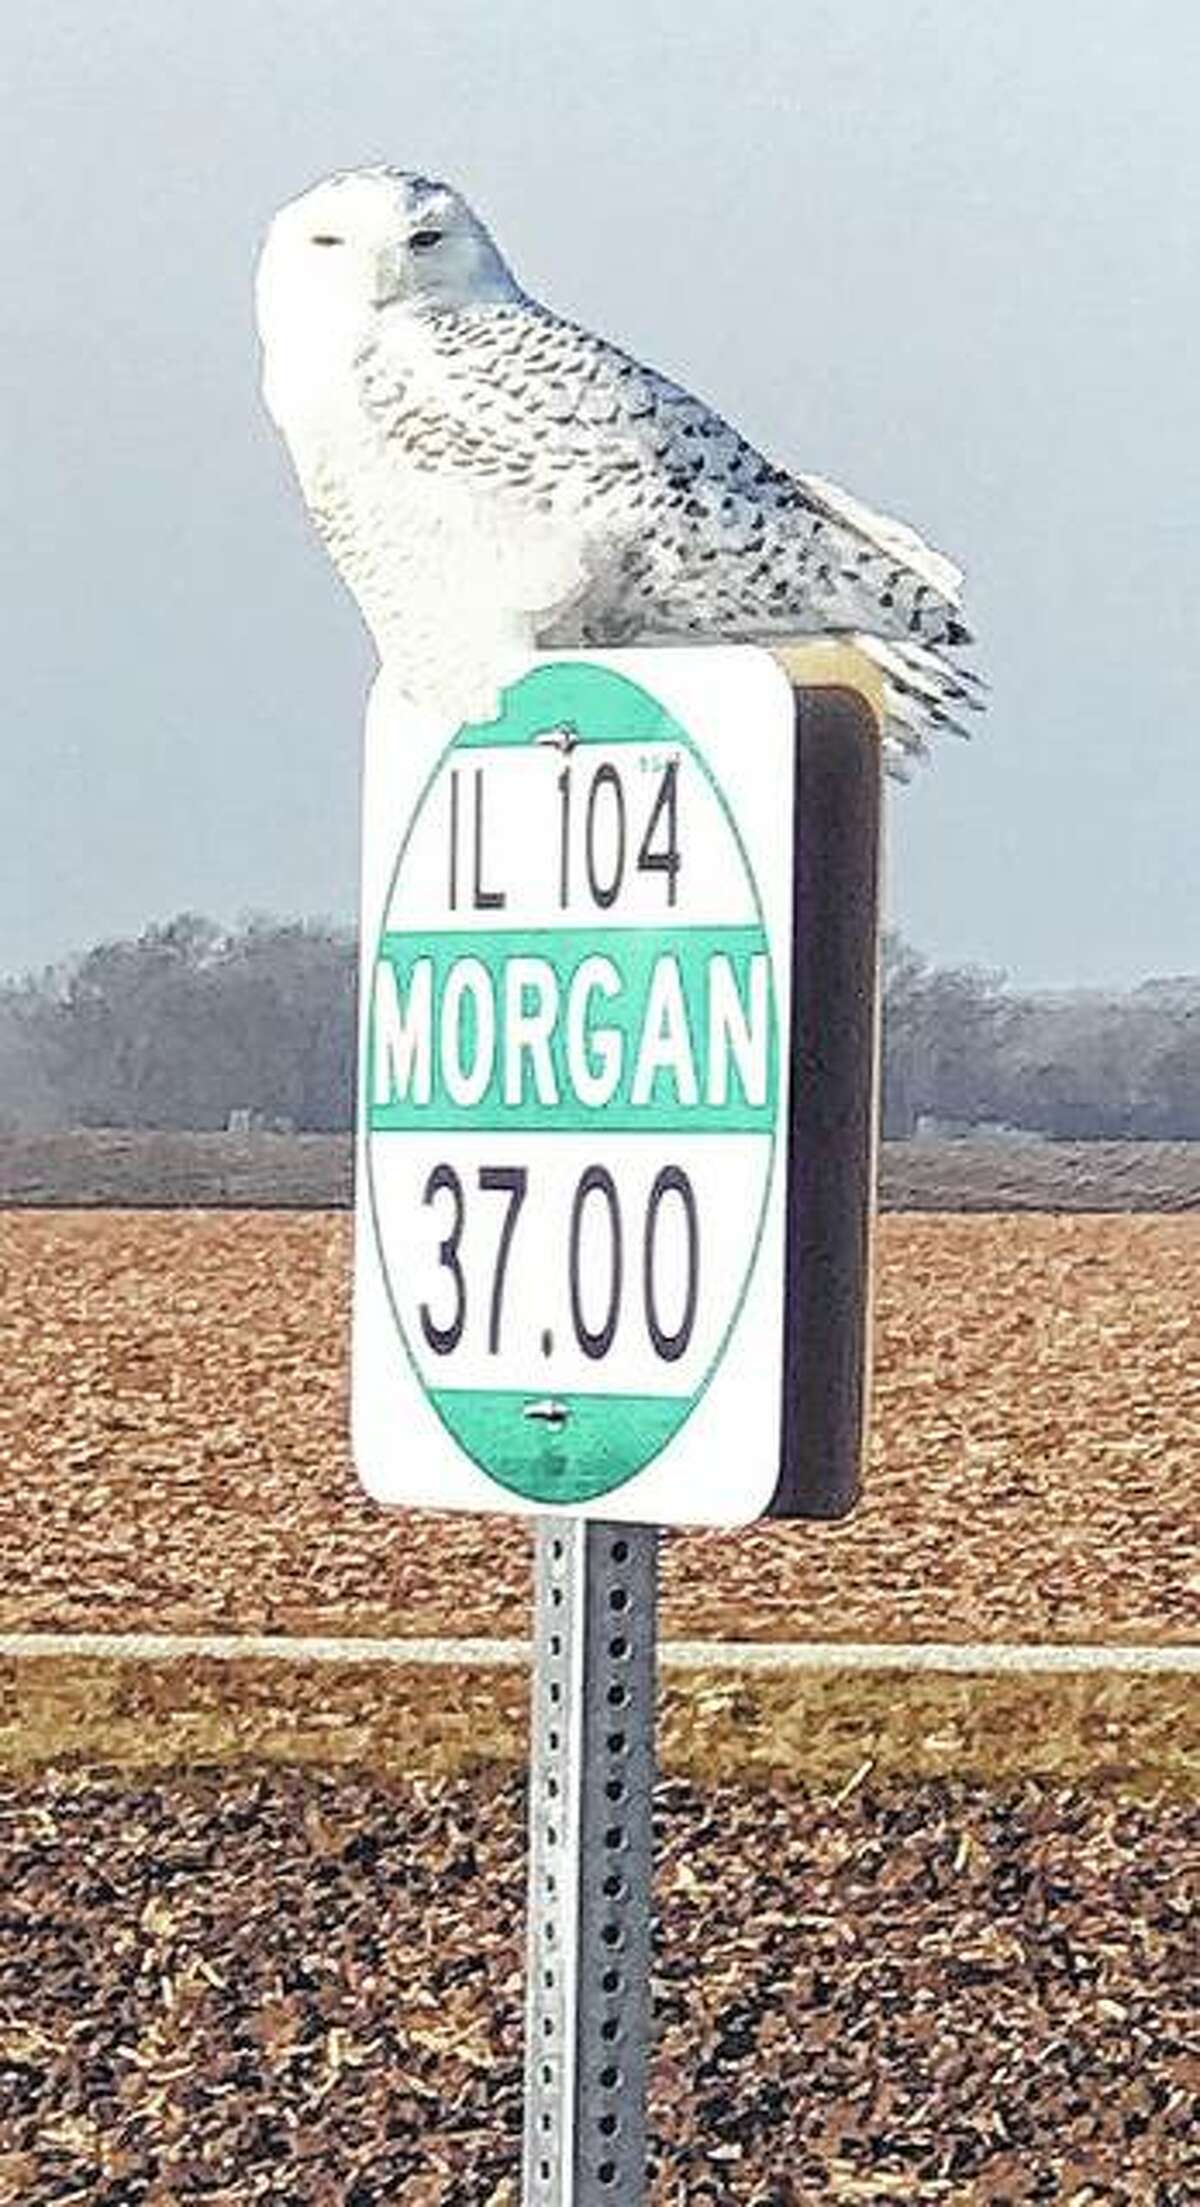 A snowy owl casts a gaze on its surroundings on the east side of Franklin.